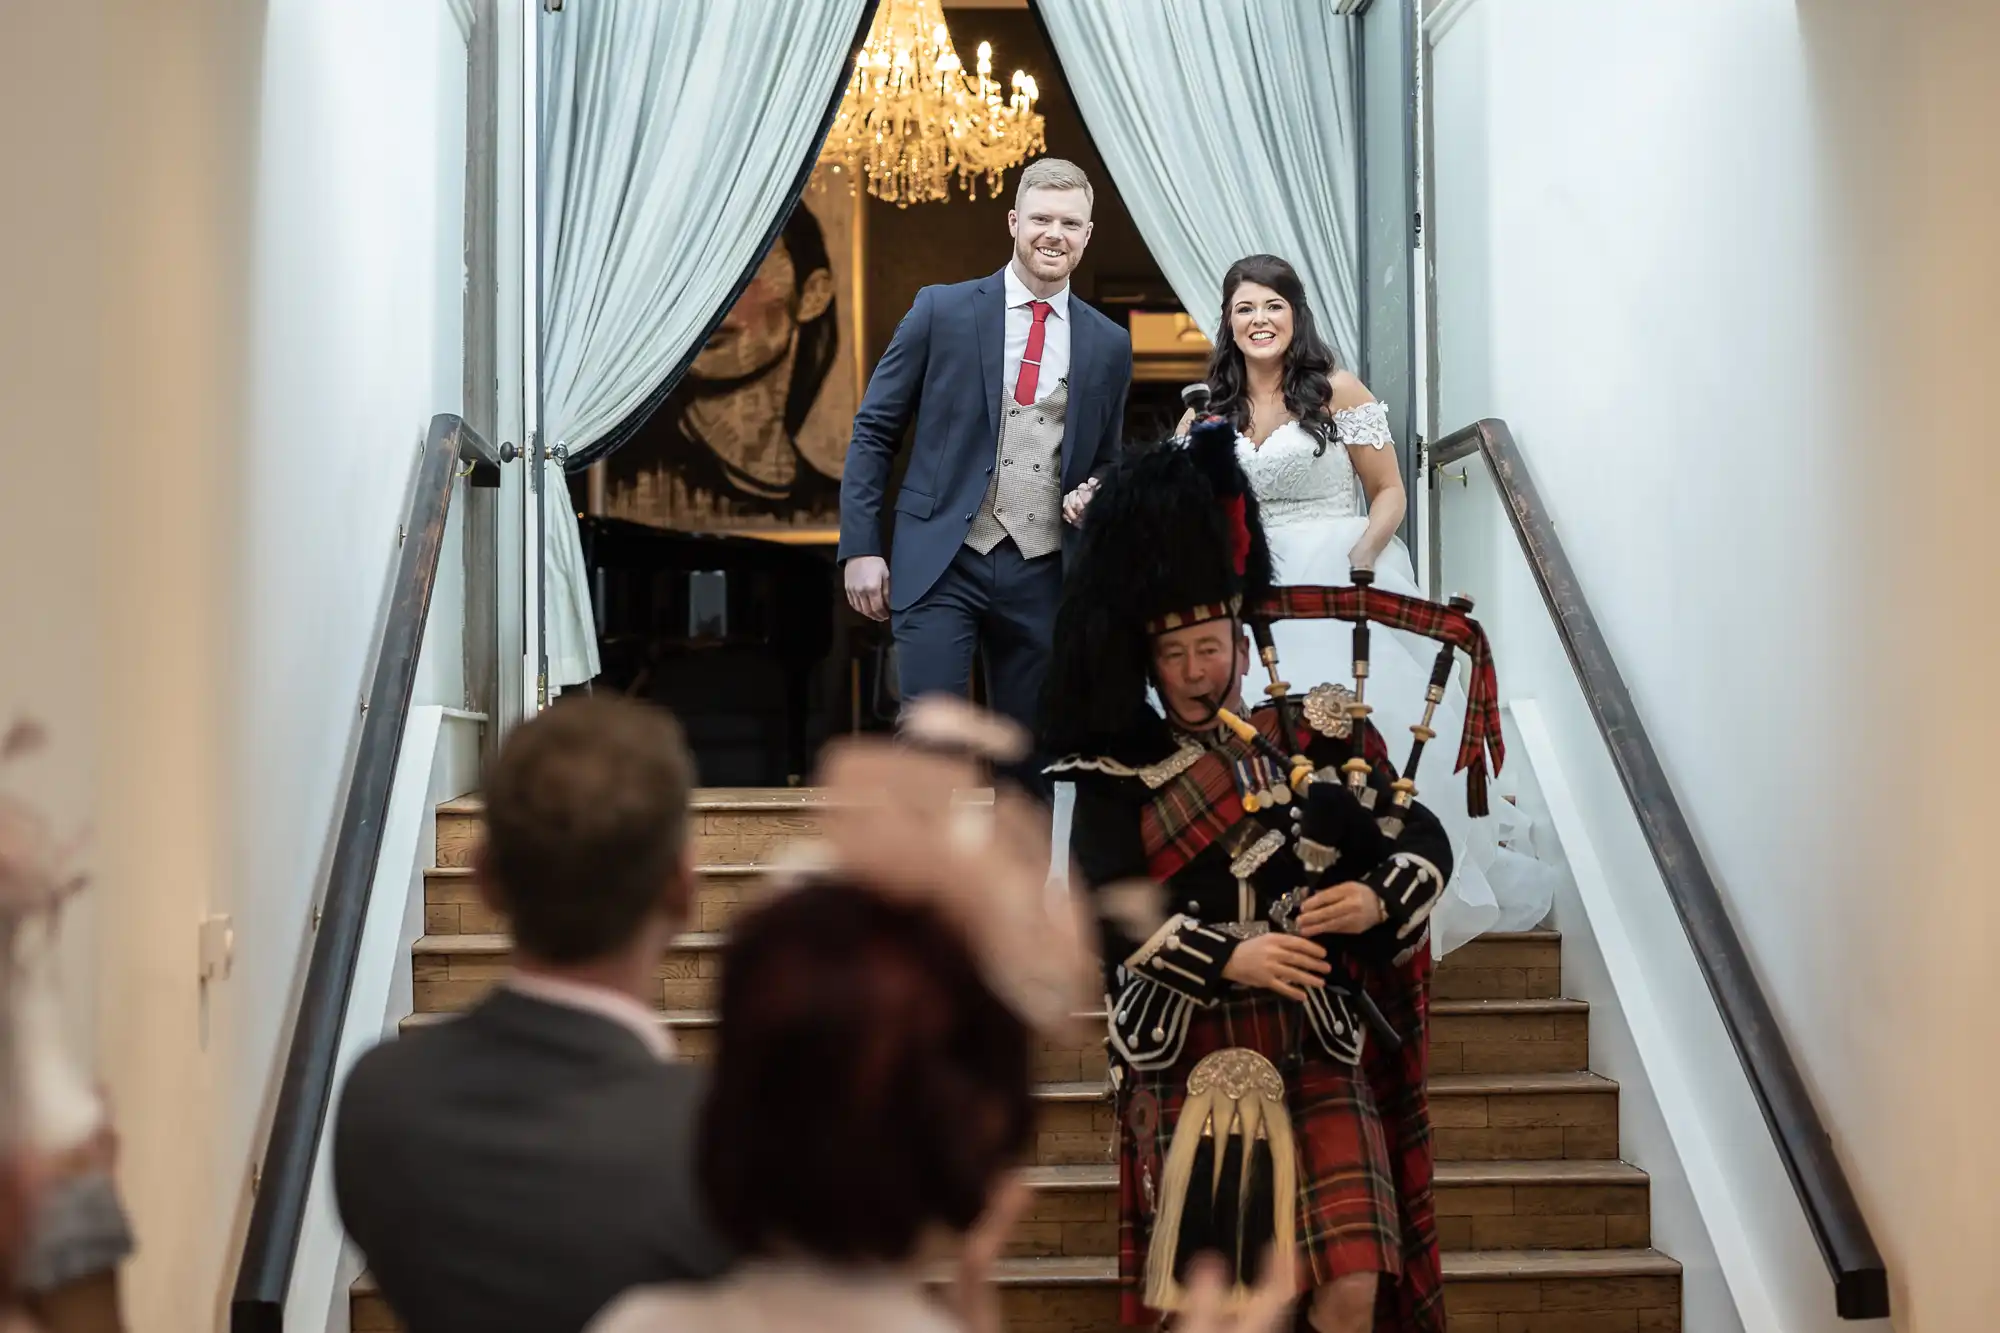 A newlywed couple smiles as they walk down a staircase, led by a bagpipe player in traditional attire. Guests applaud in the foreground, and a chandelier hangs above.